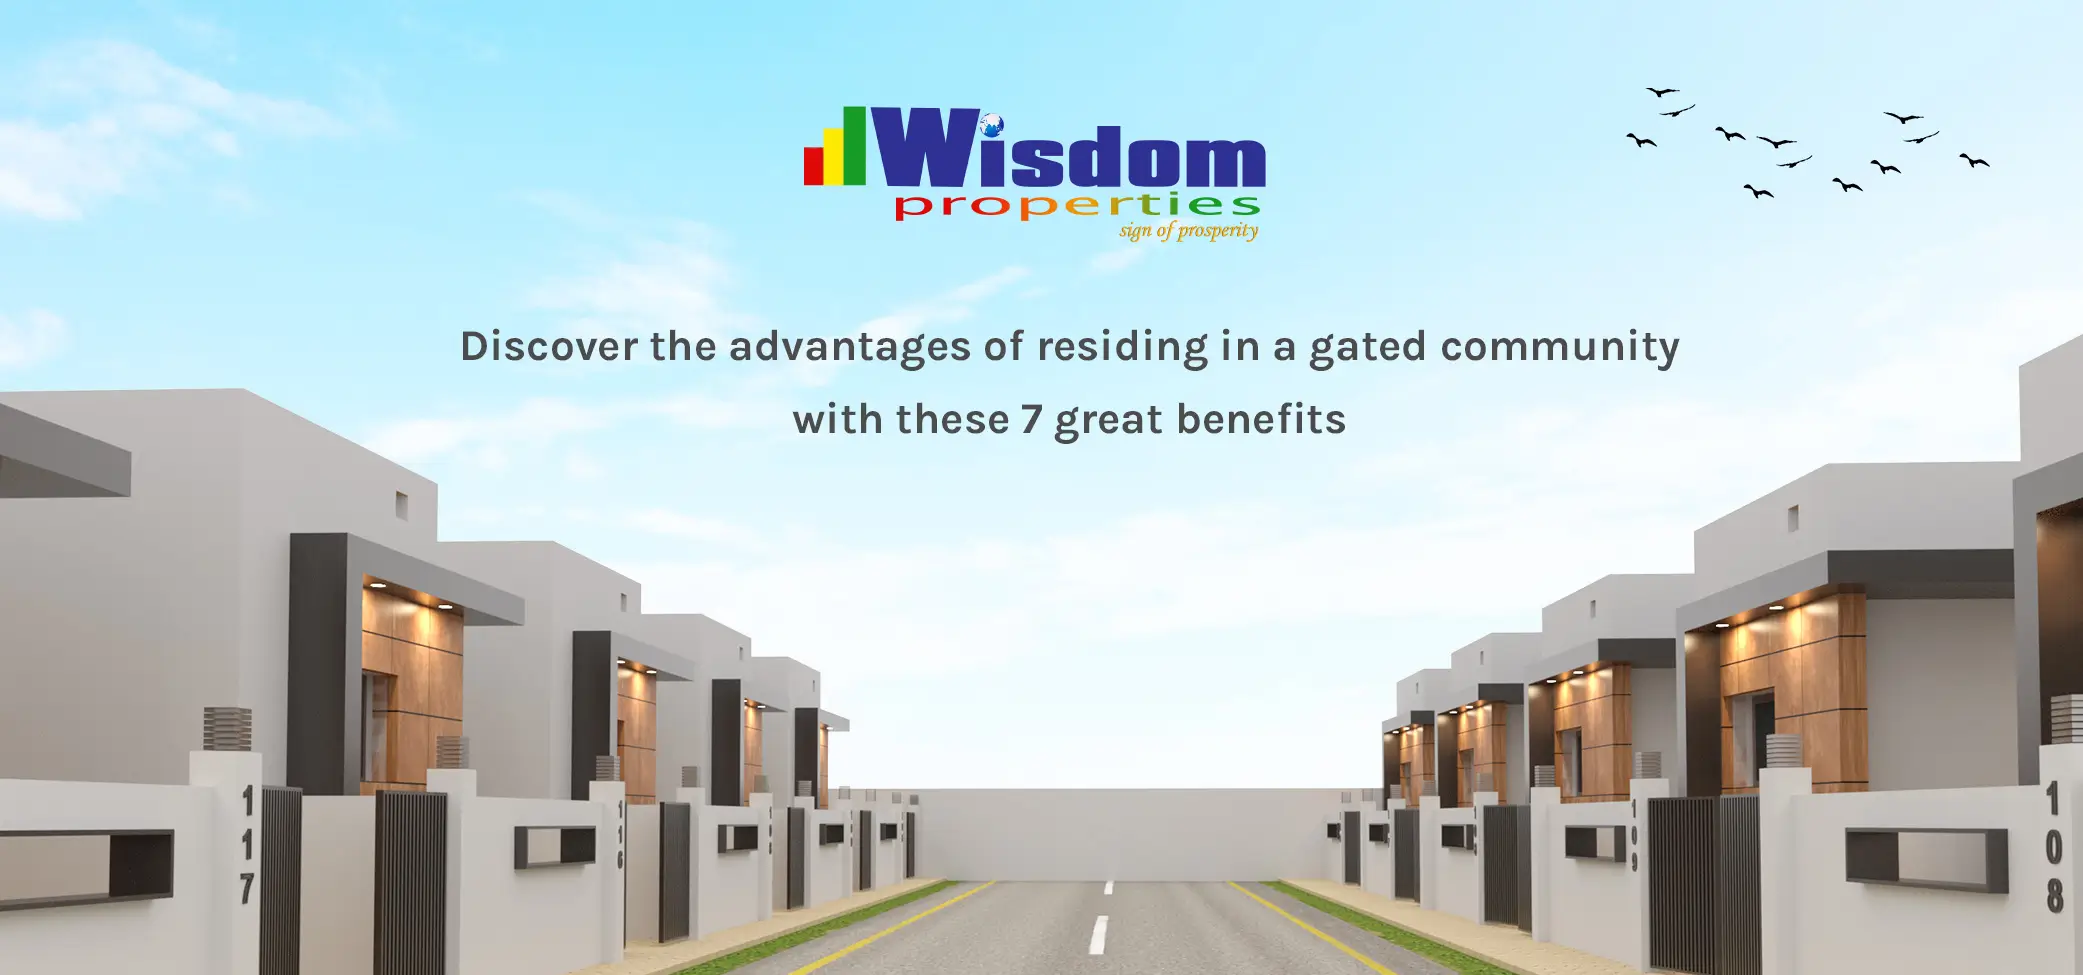 Discover the advantages of residing in a gated community with these 7 great benefits